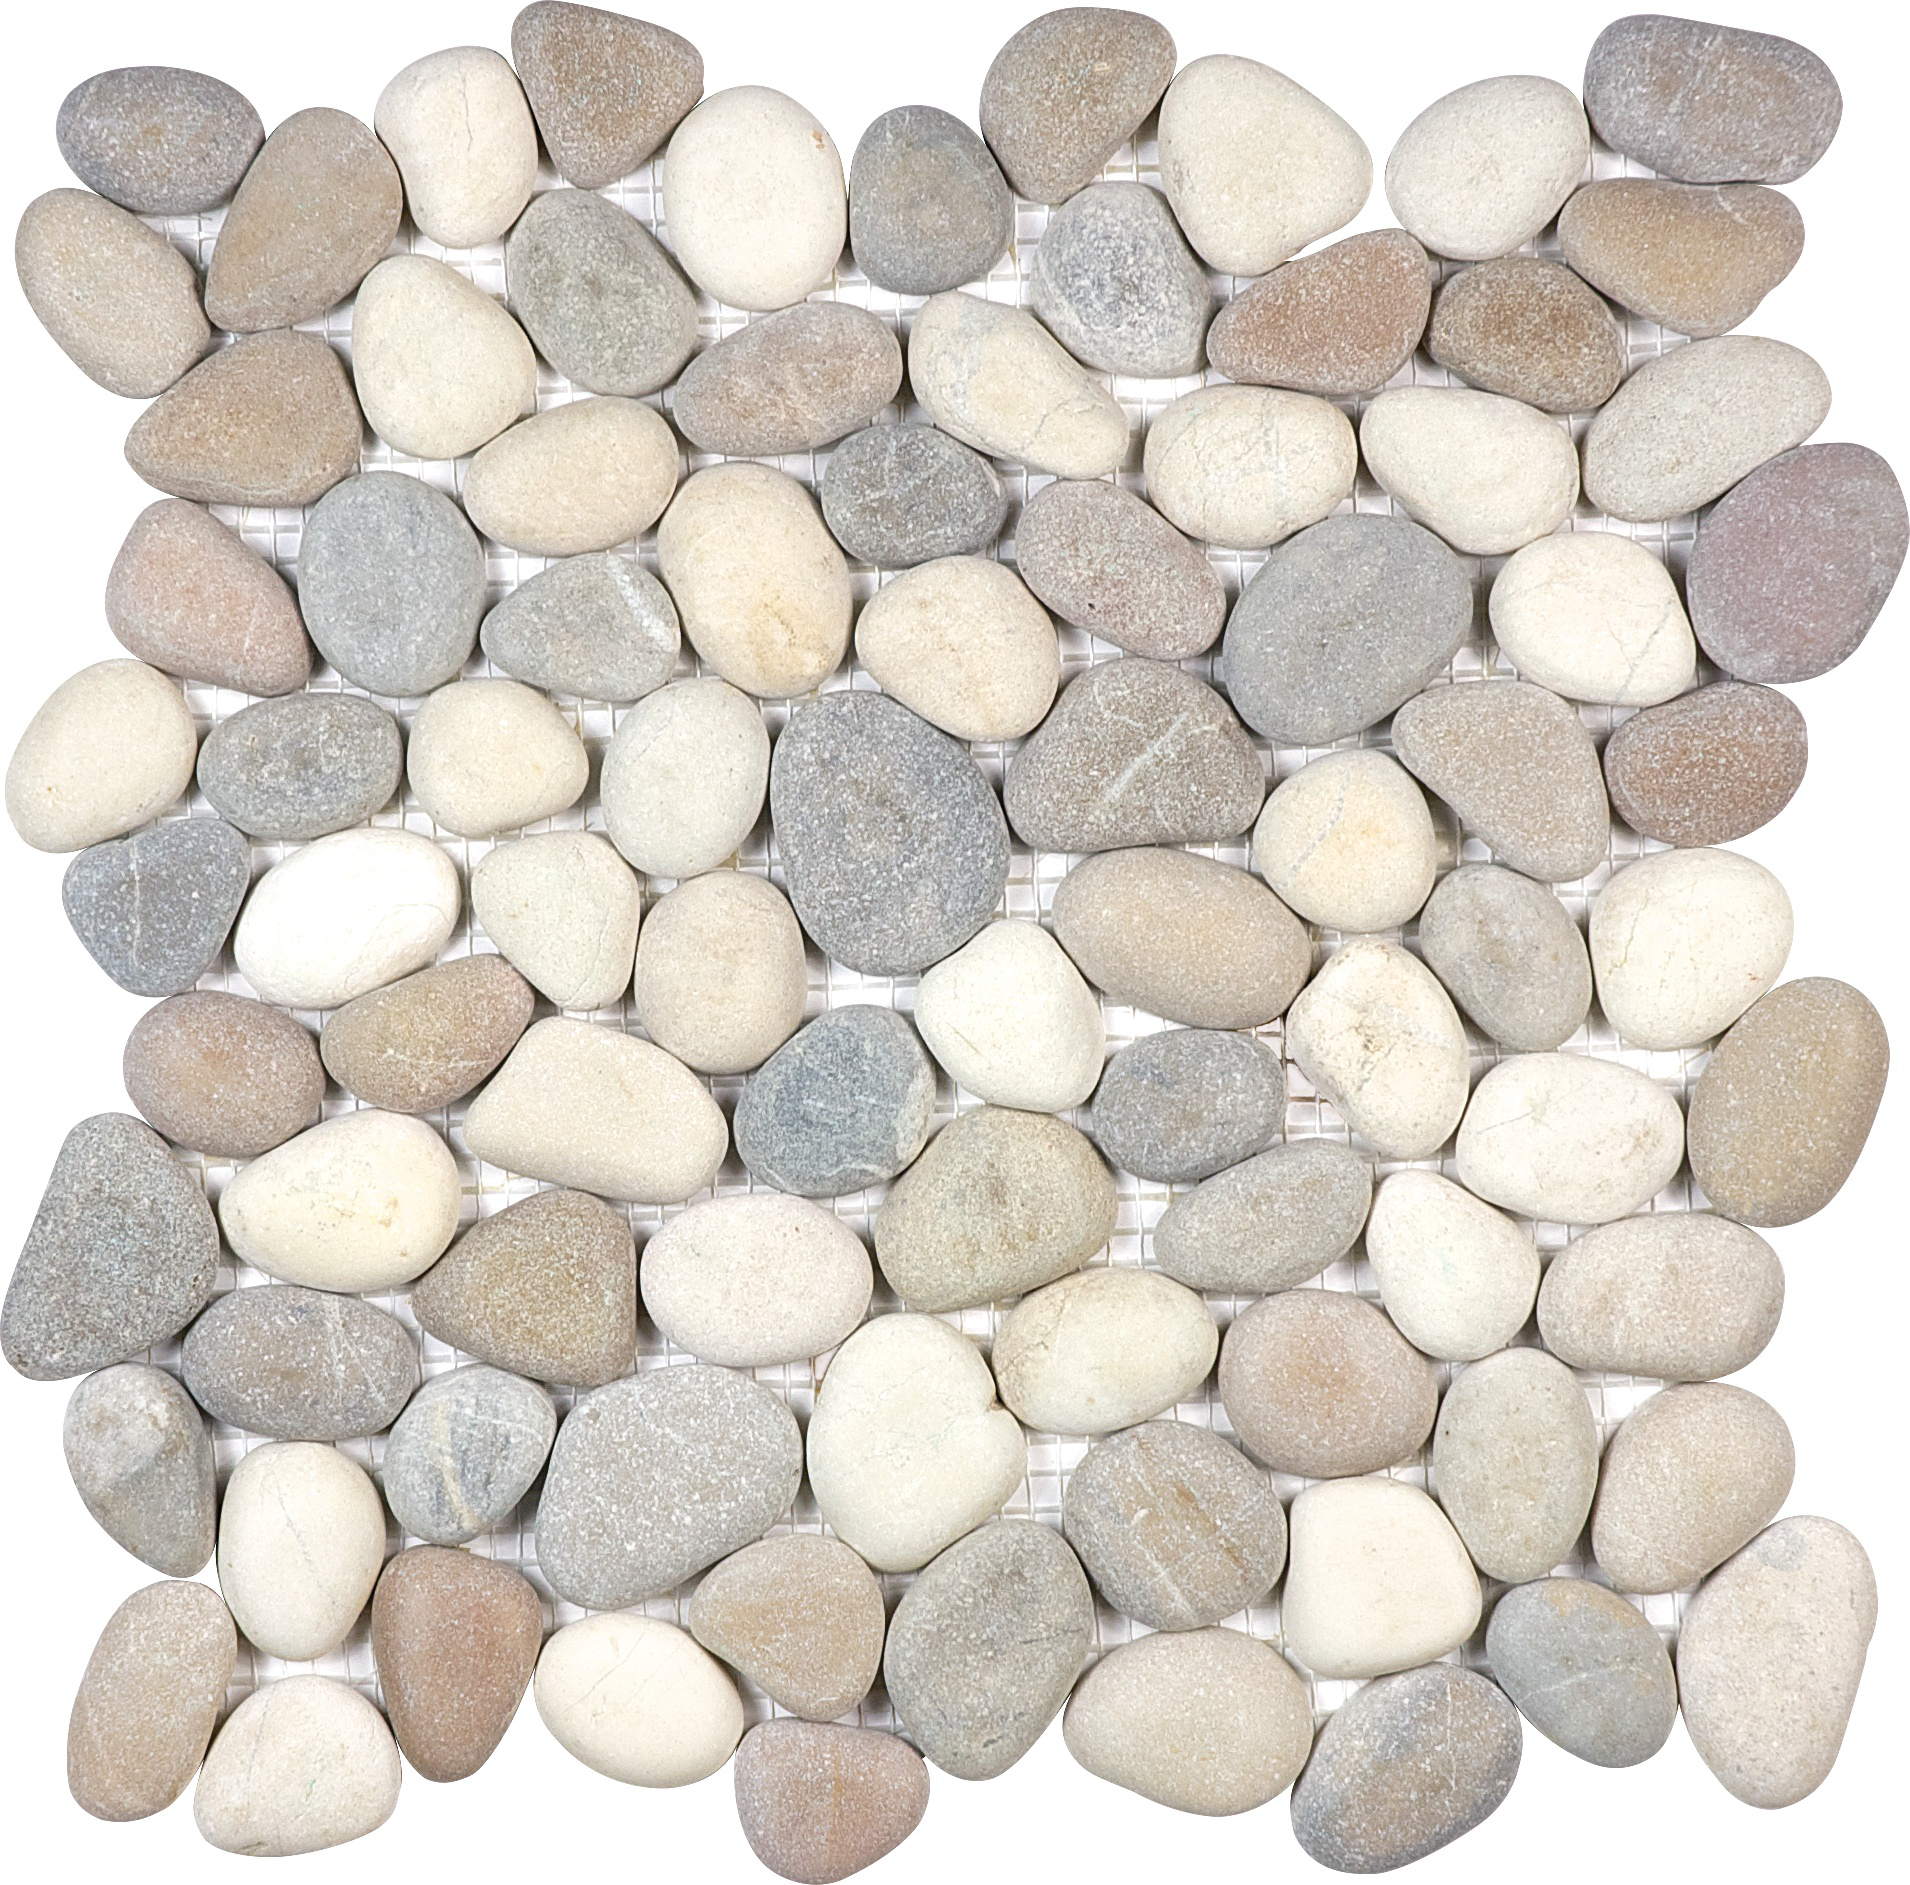 pebble harmony warm natural pebble pattern natural stone mosaic stone blend blend from zen anatolia collection distributed by surface group international matte finish straight edge edge mesh shape